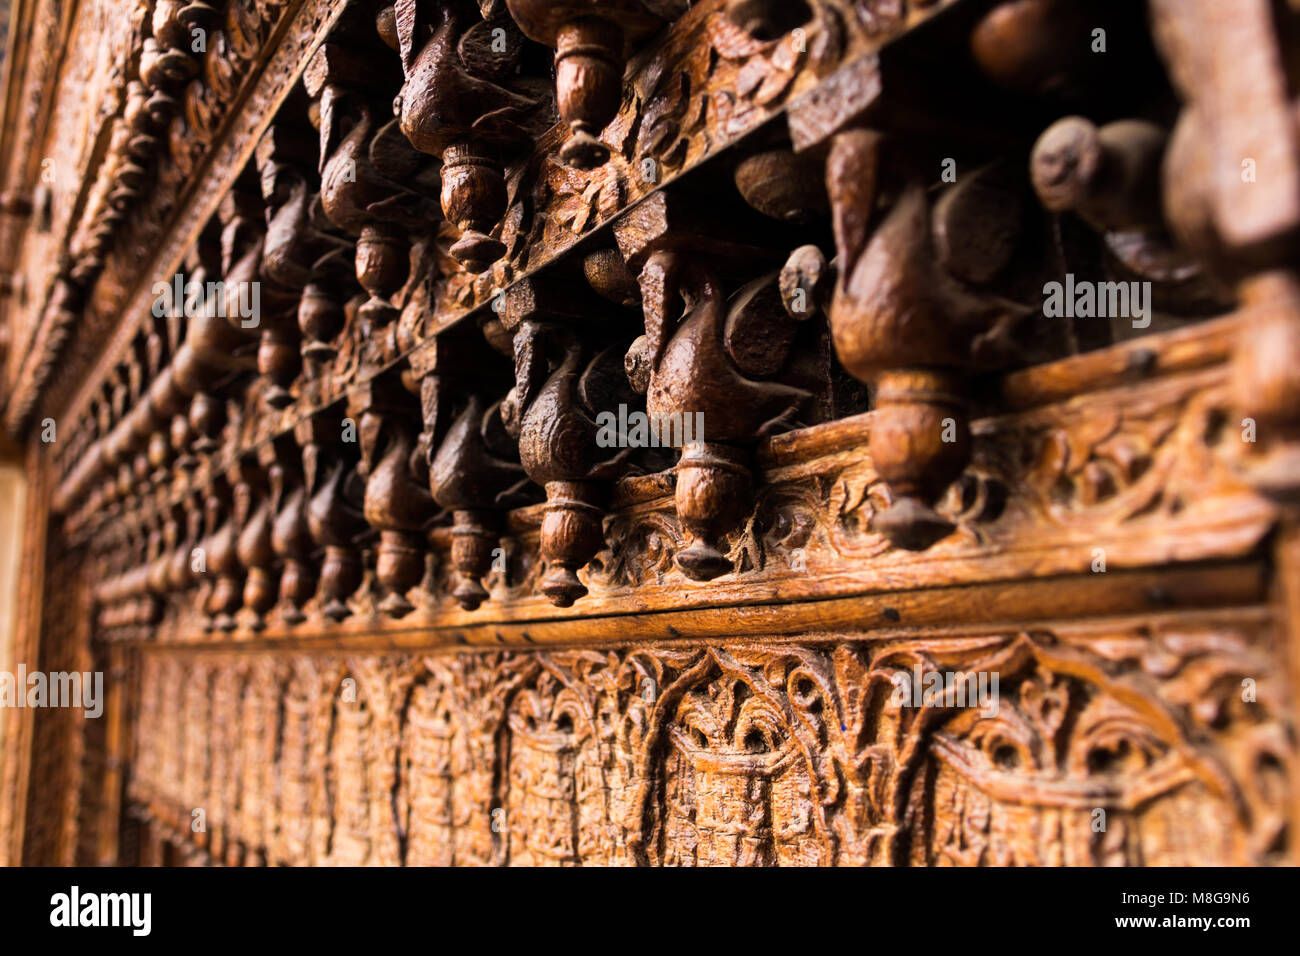 Exquisite ornate woodwork repetitive pattern Stock Photo